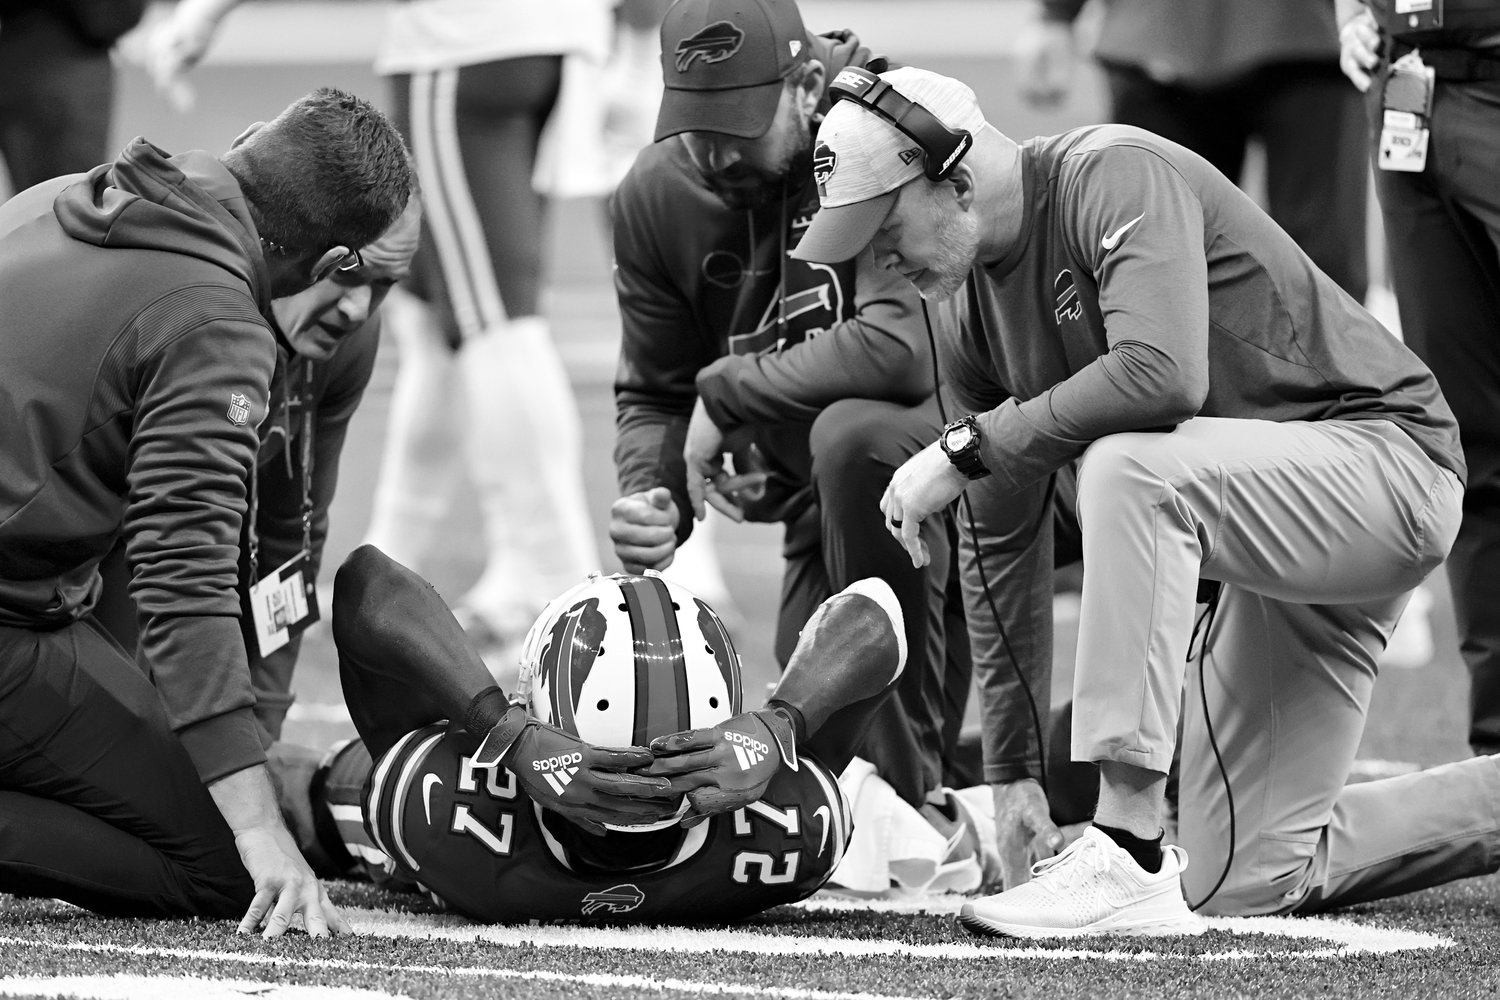 OUT FOR THE SEASON — Injured Buffalo Bills cornerback Tre’Davious White (27) is helped by head coach Sean McDermott, right, and medical staff in the first half of an NFL game against the New Orleans Saints in New Orleans, Thursday, Nov. 25. The Bills confirmed that White tore his ACL and will be out for the remainder of the season.